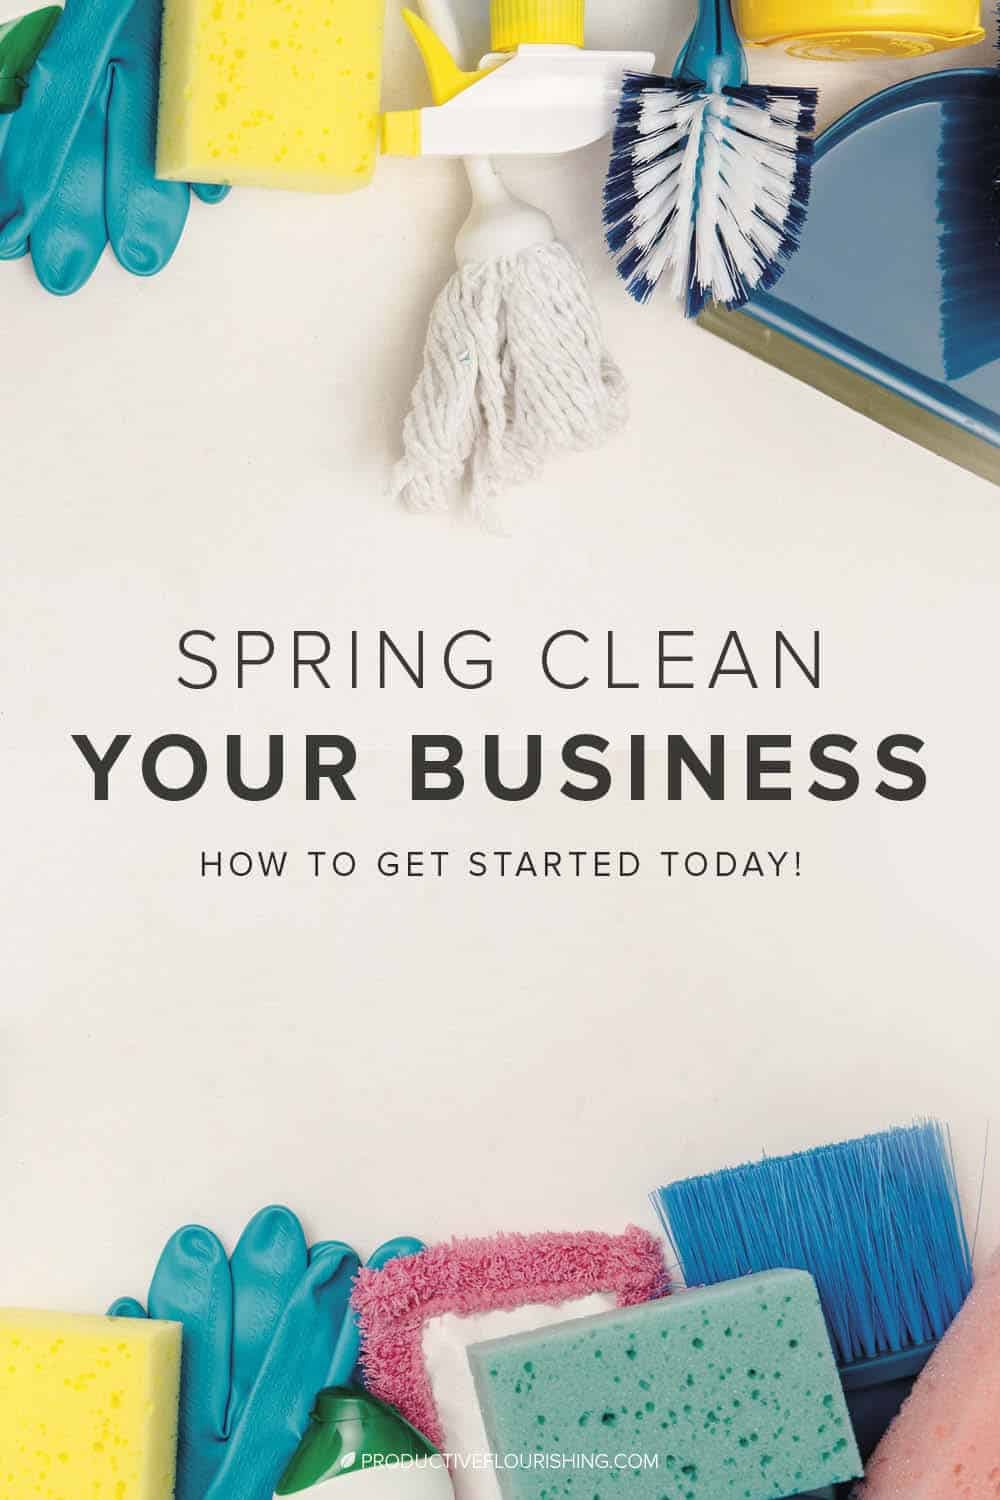 Learn 3 ways to spring clean your small business here and become more productive. Winter has been a difficult one for many entrepreneurs this year. Spring can’t come soon enough. With that sunshine often comes a burst of renewed energy. Welcome: spring cleaning for your business. #productivitytips #entrepreneurship #productiveflourishing